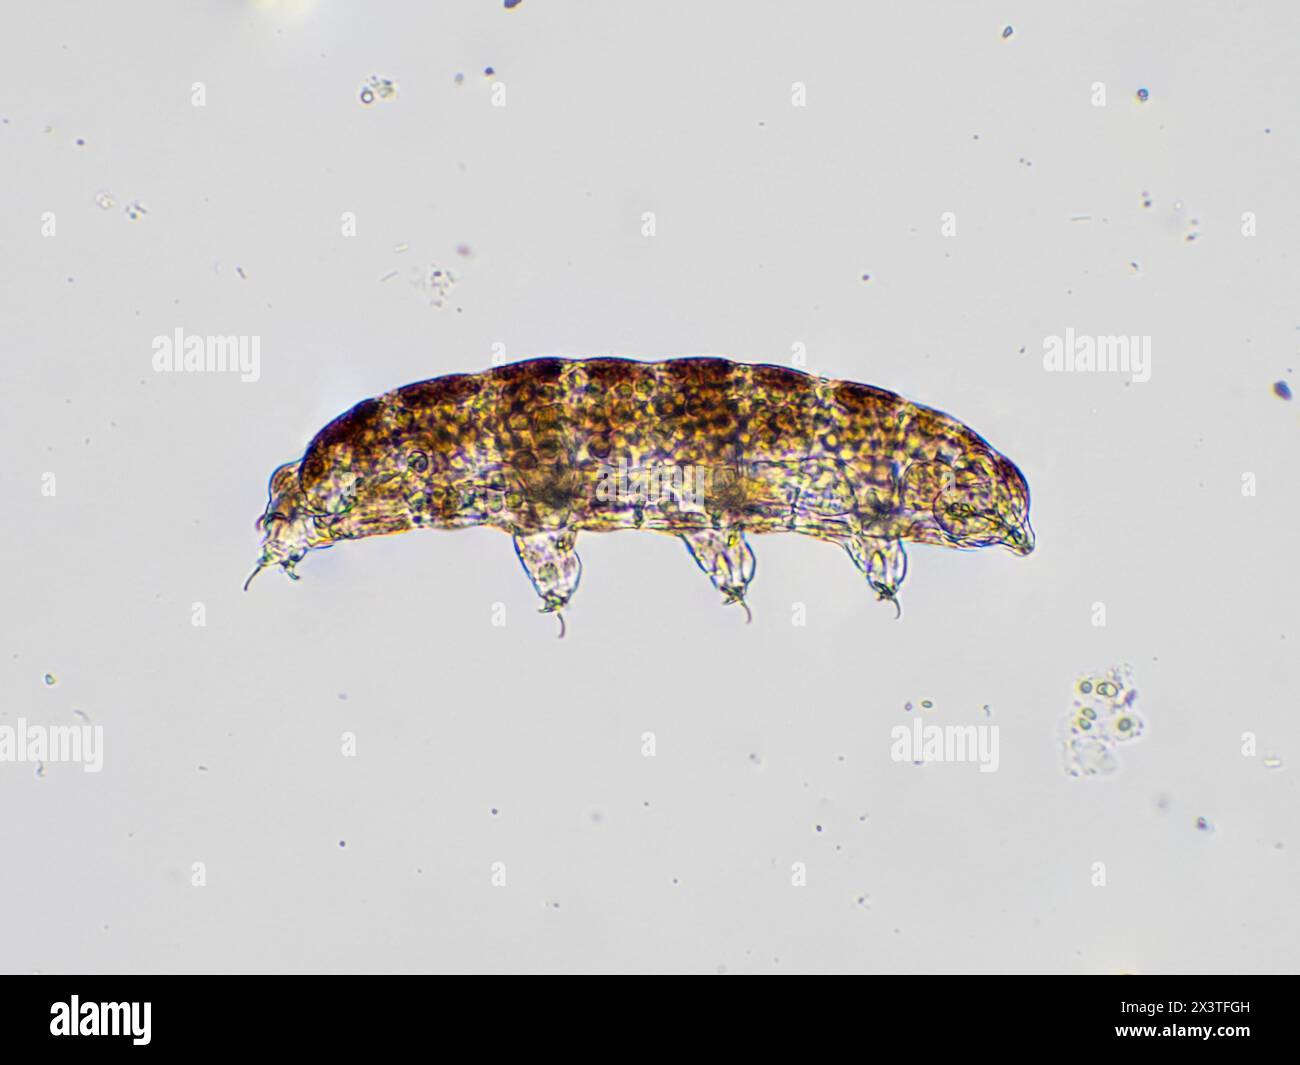 photomicrograph showing a side view of a live microscopic water bear (tardigrade) Stock Photo